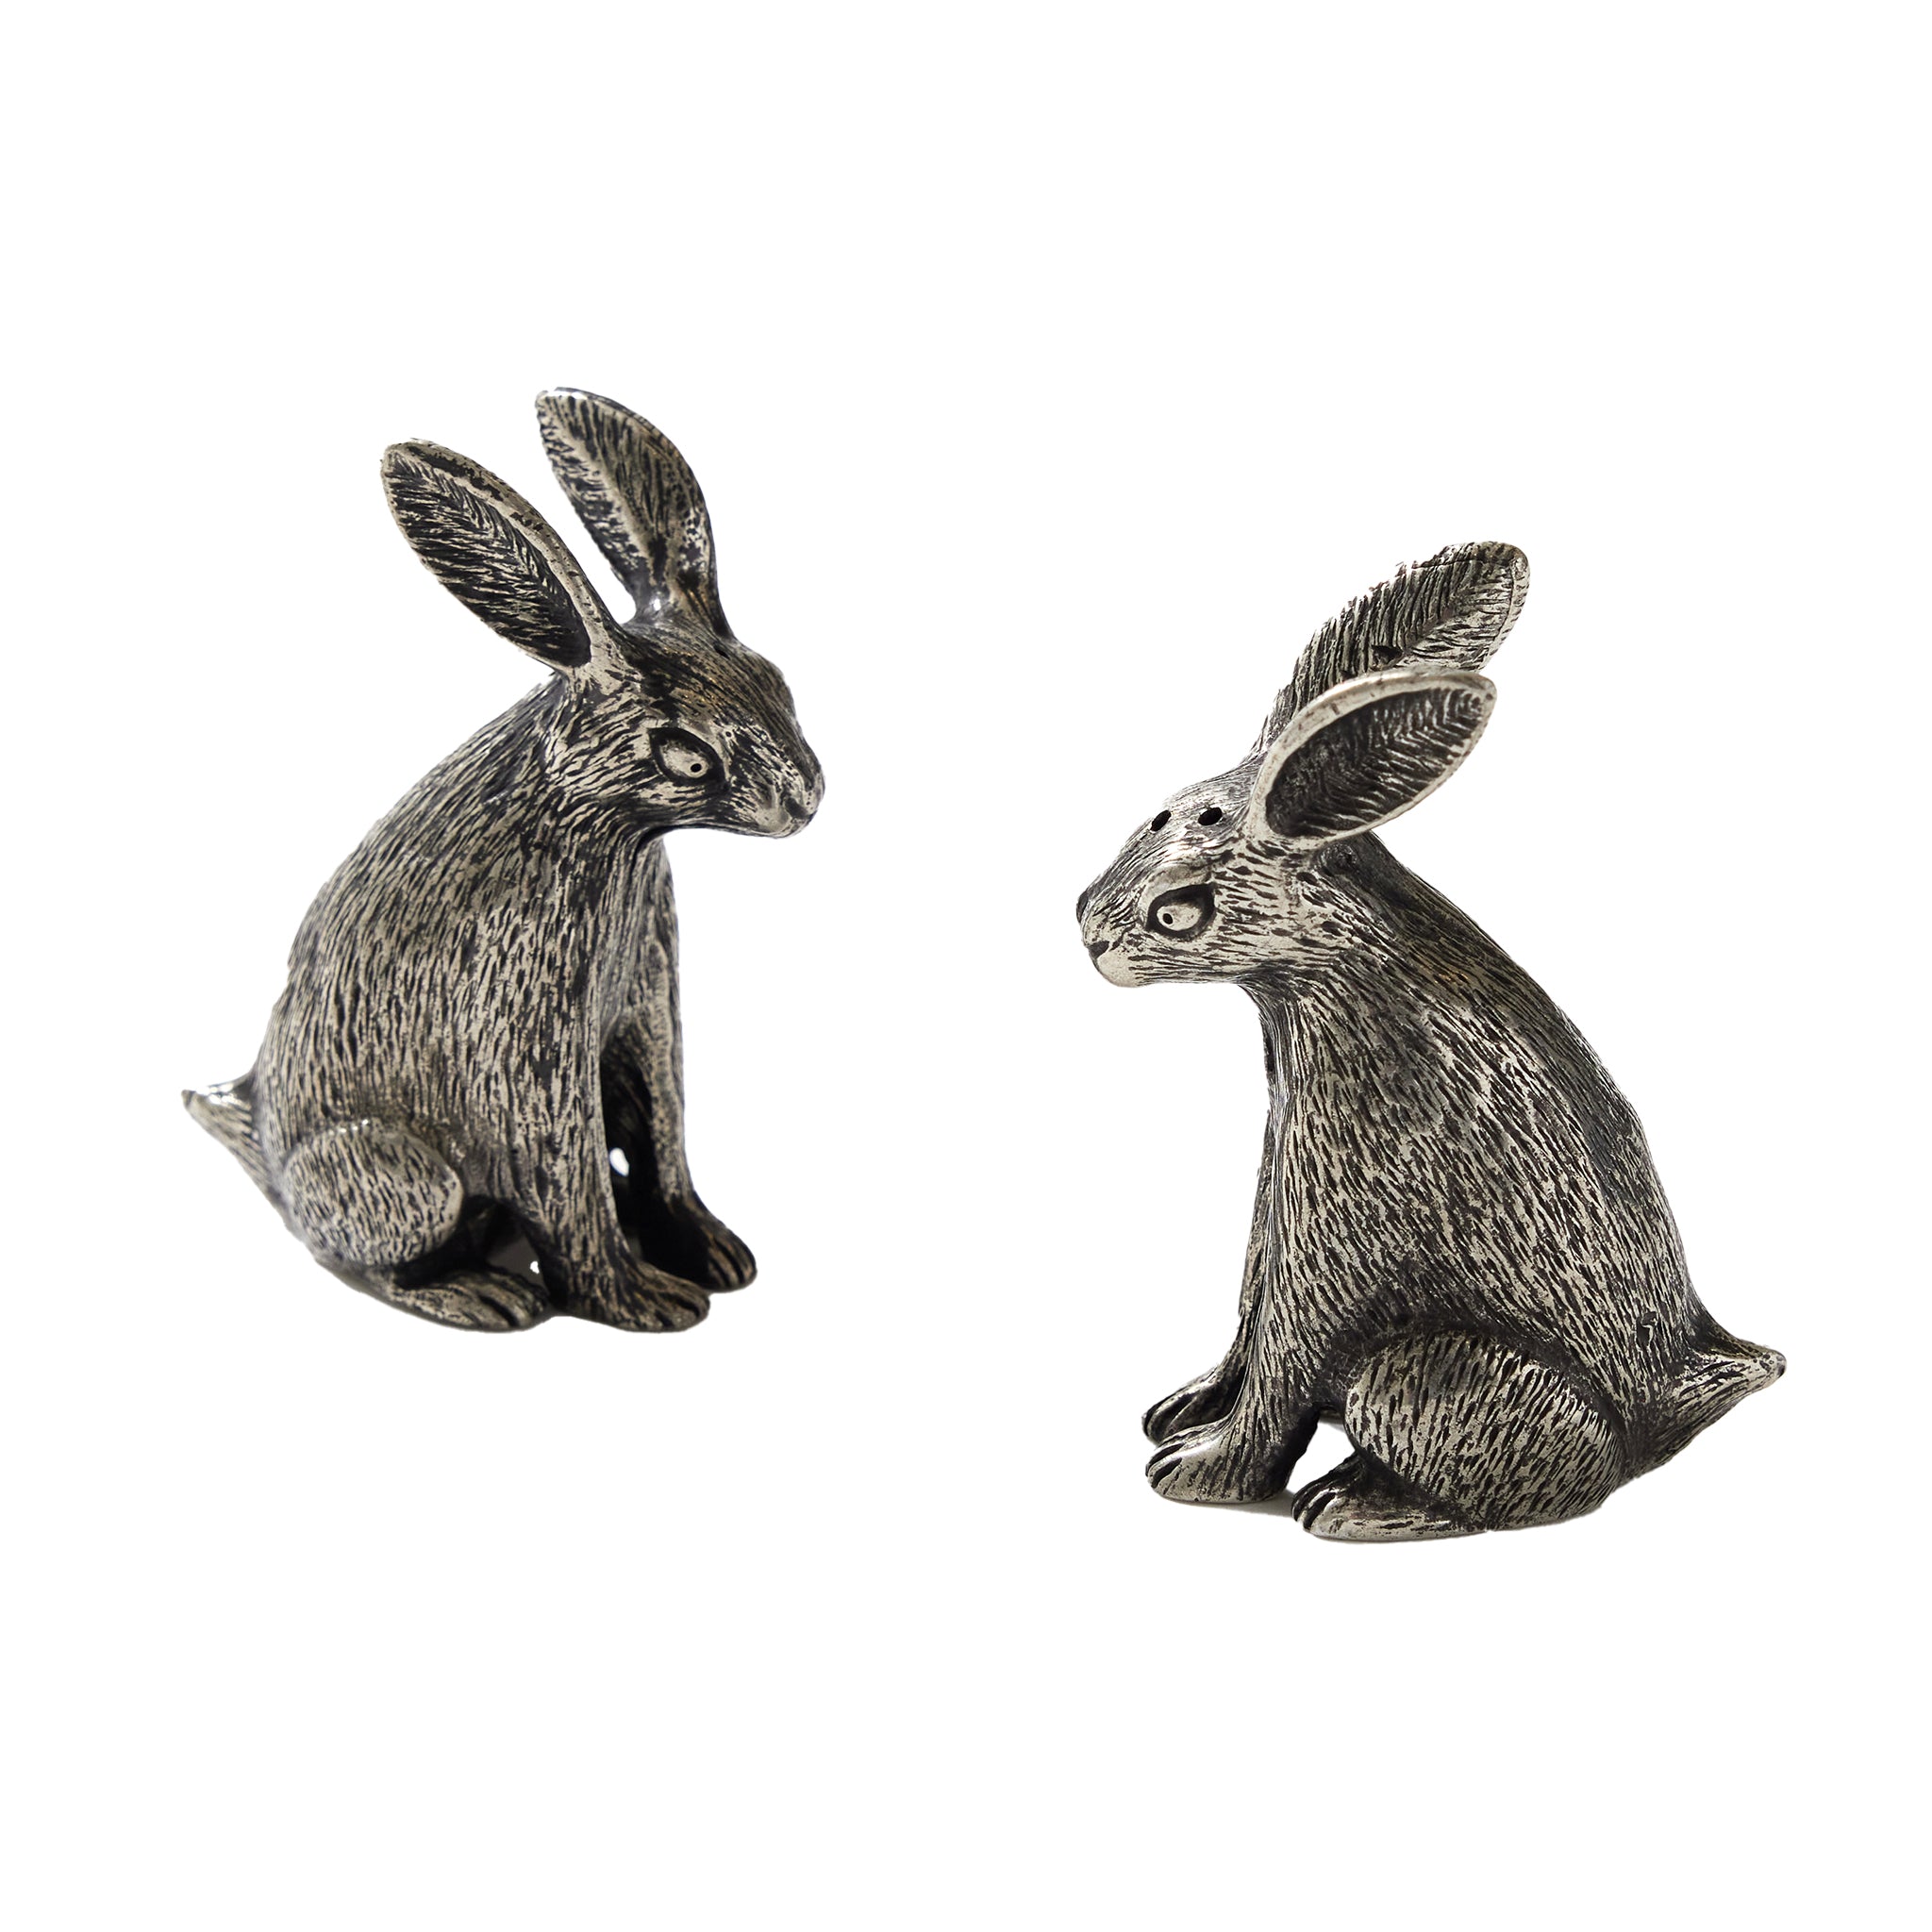 Two pewter salt and pepper shakers designed in the shape of rabbits, with intricate textured details to resemble fur.